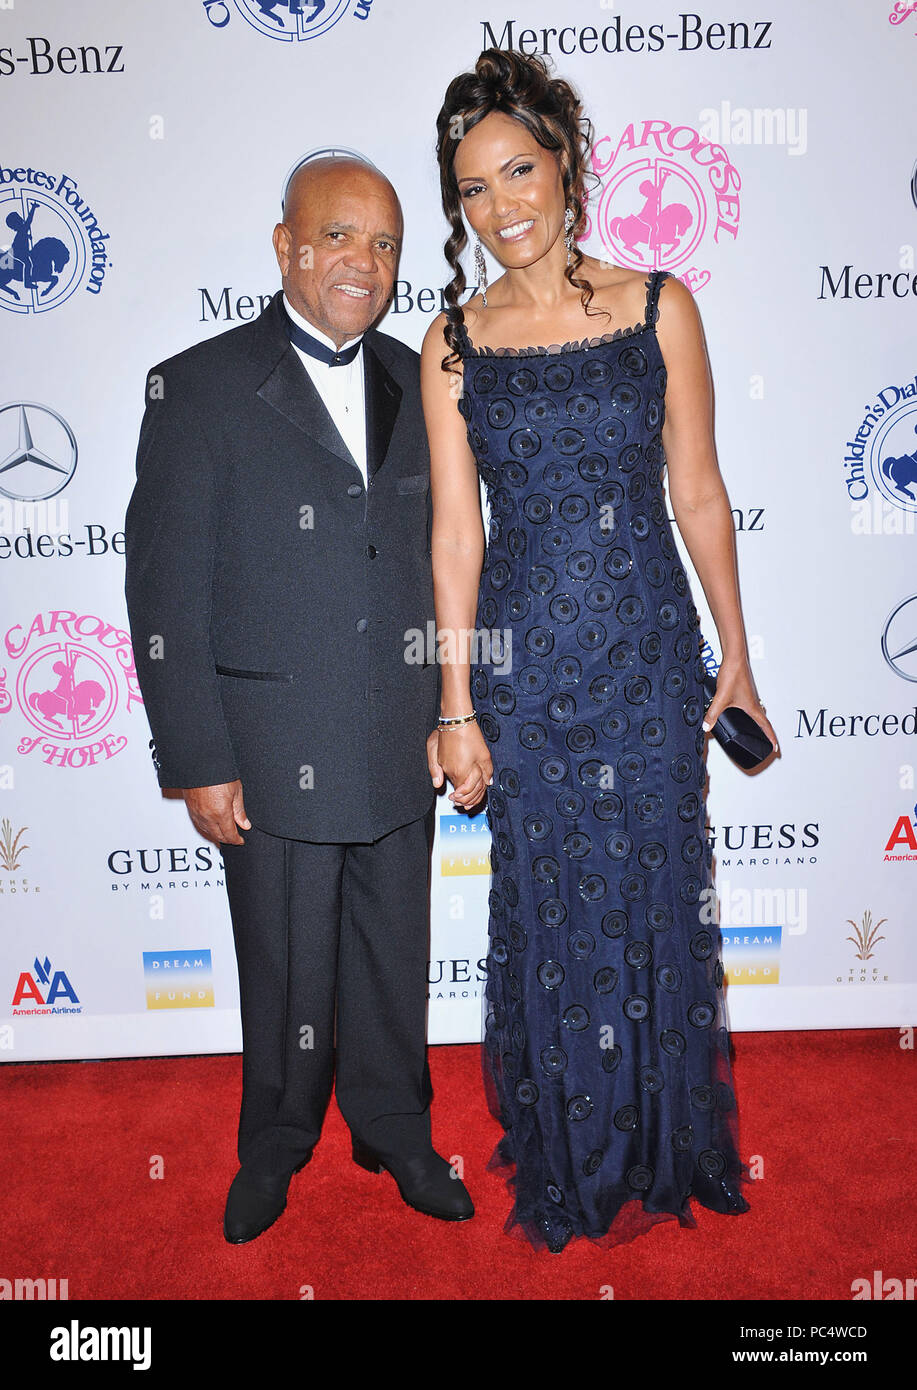 Berry Gordy  at the Carousel Of Hope 2012 at the Beverly Hilton Hotel in Los Angeles.Berry Gordy  ------------- Red Carpet Event, Vertical, USA, Film Industry, Celebrities,  Photography, Bestof, Arts Culture and Entertainment, Topix Celebrities fashion /  Vertical, Best of, Event in Hollywood Life - California,  Red Carpet and backstage, USA, Film Industry, Celebrities,  movie celebrities, TV celebrities, Music celebrities, Photography, Bestof, Arts Culture and Entertainment,  Topix, vertical,  family from from the year , 2012, inquiry tsuni@Gamma-USA.com Husband and wife Stock Photo